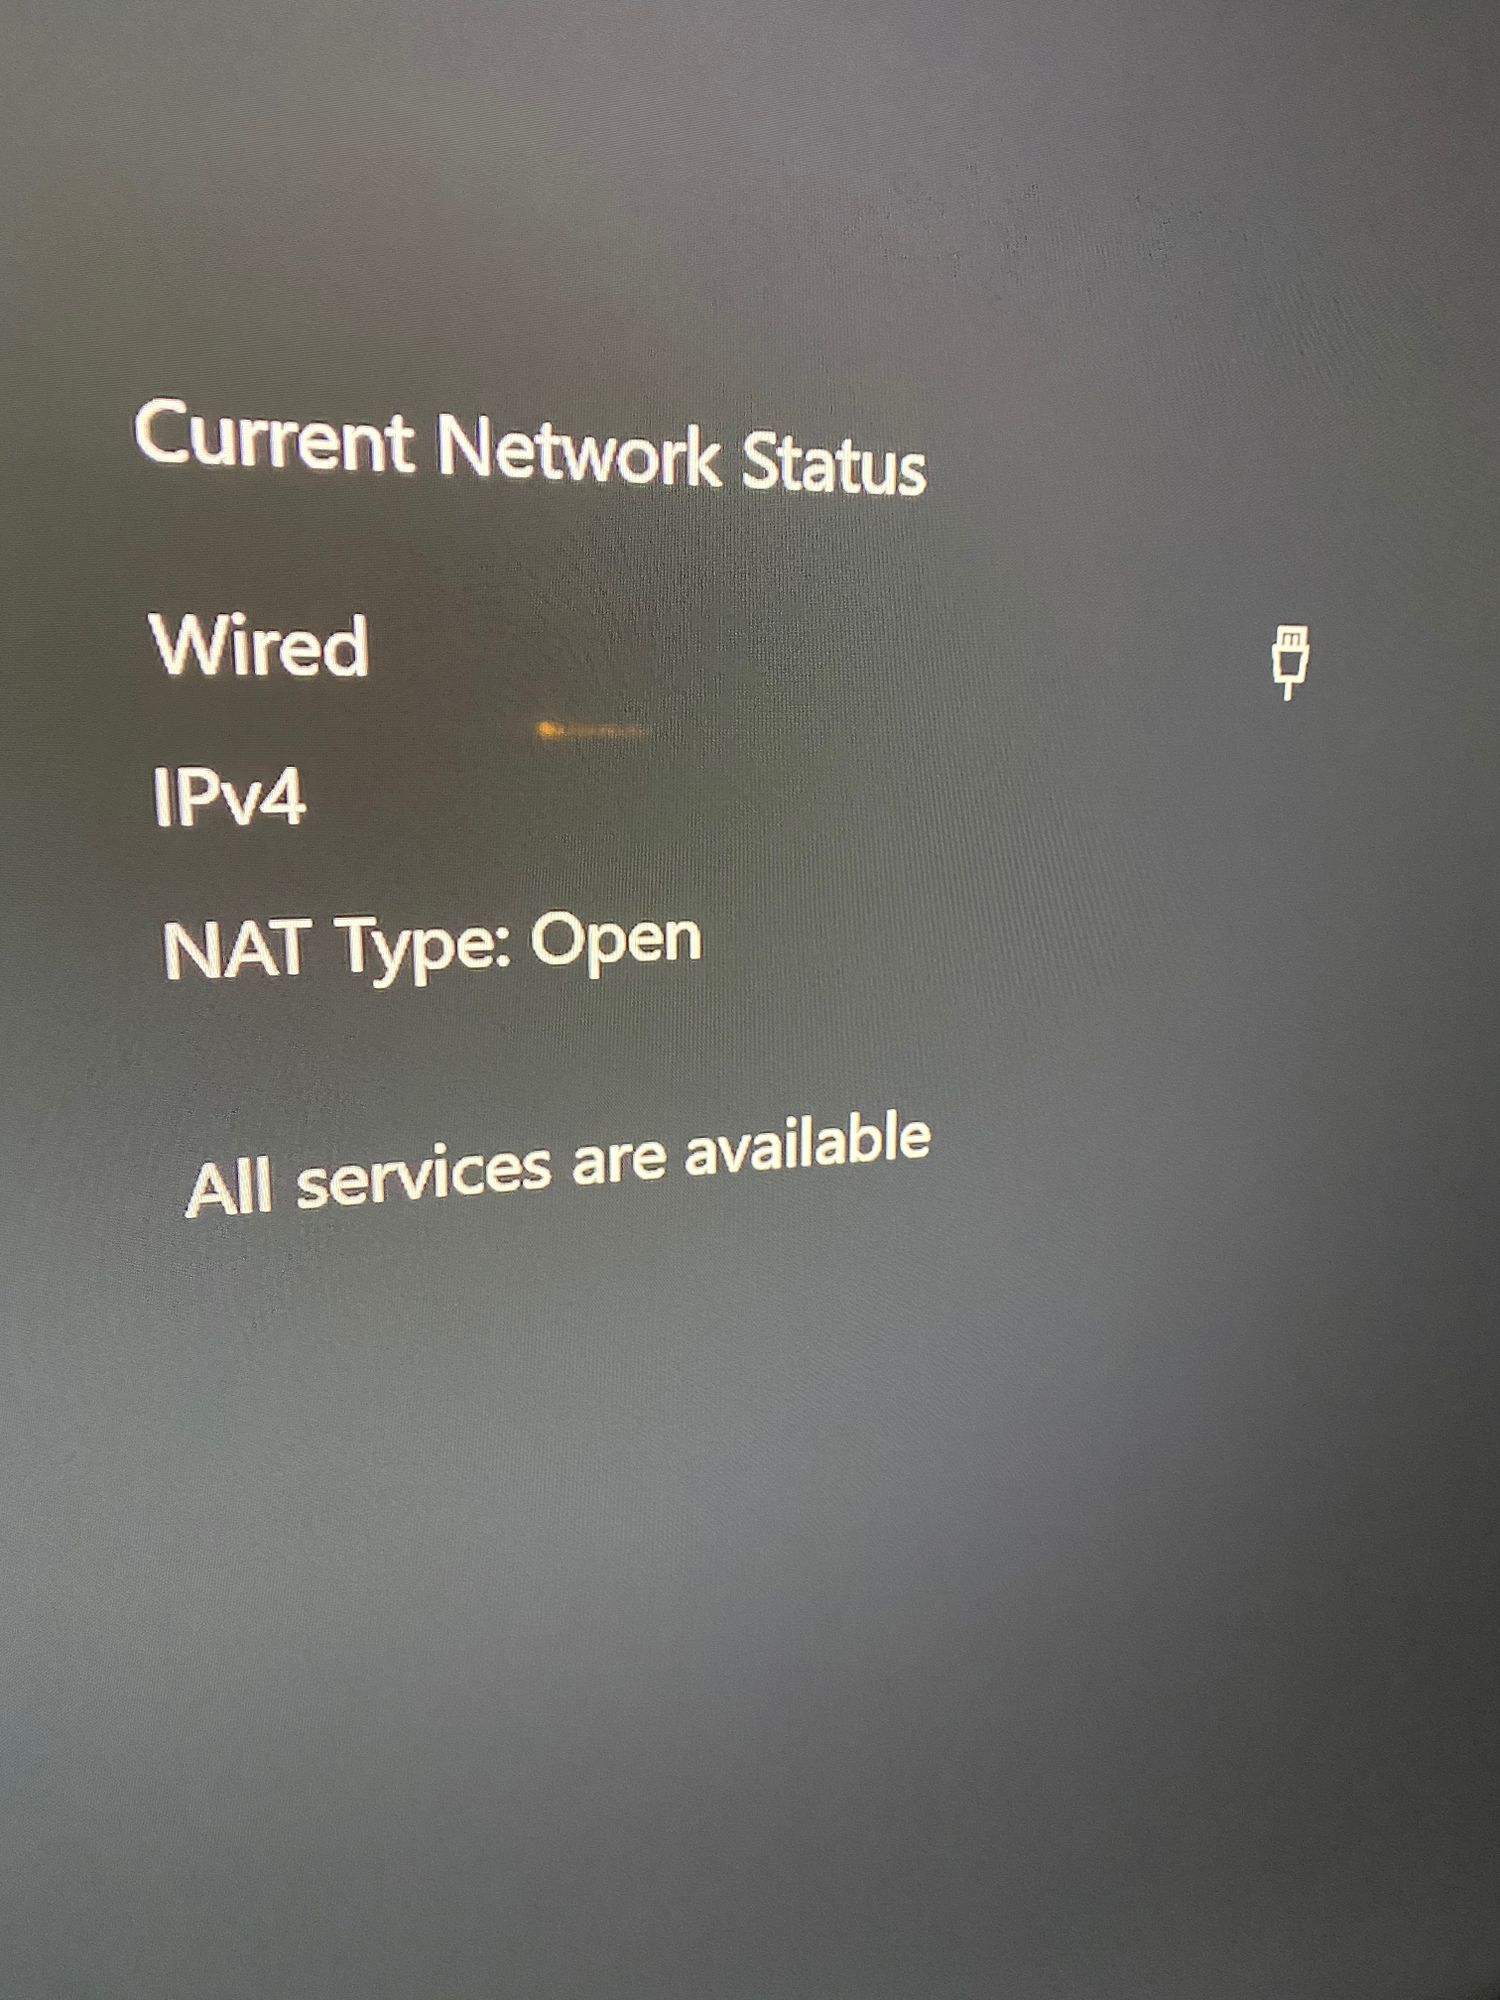 Perversion Can't read or write Promote Xbox showing IPv4, but not a IPv6 connection. How do I troubleshoot? |  Ubiquiti Community